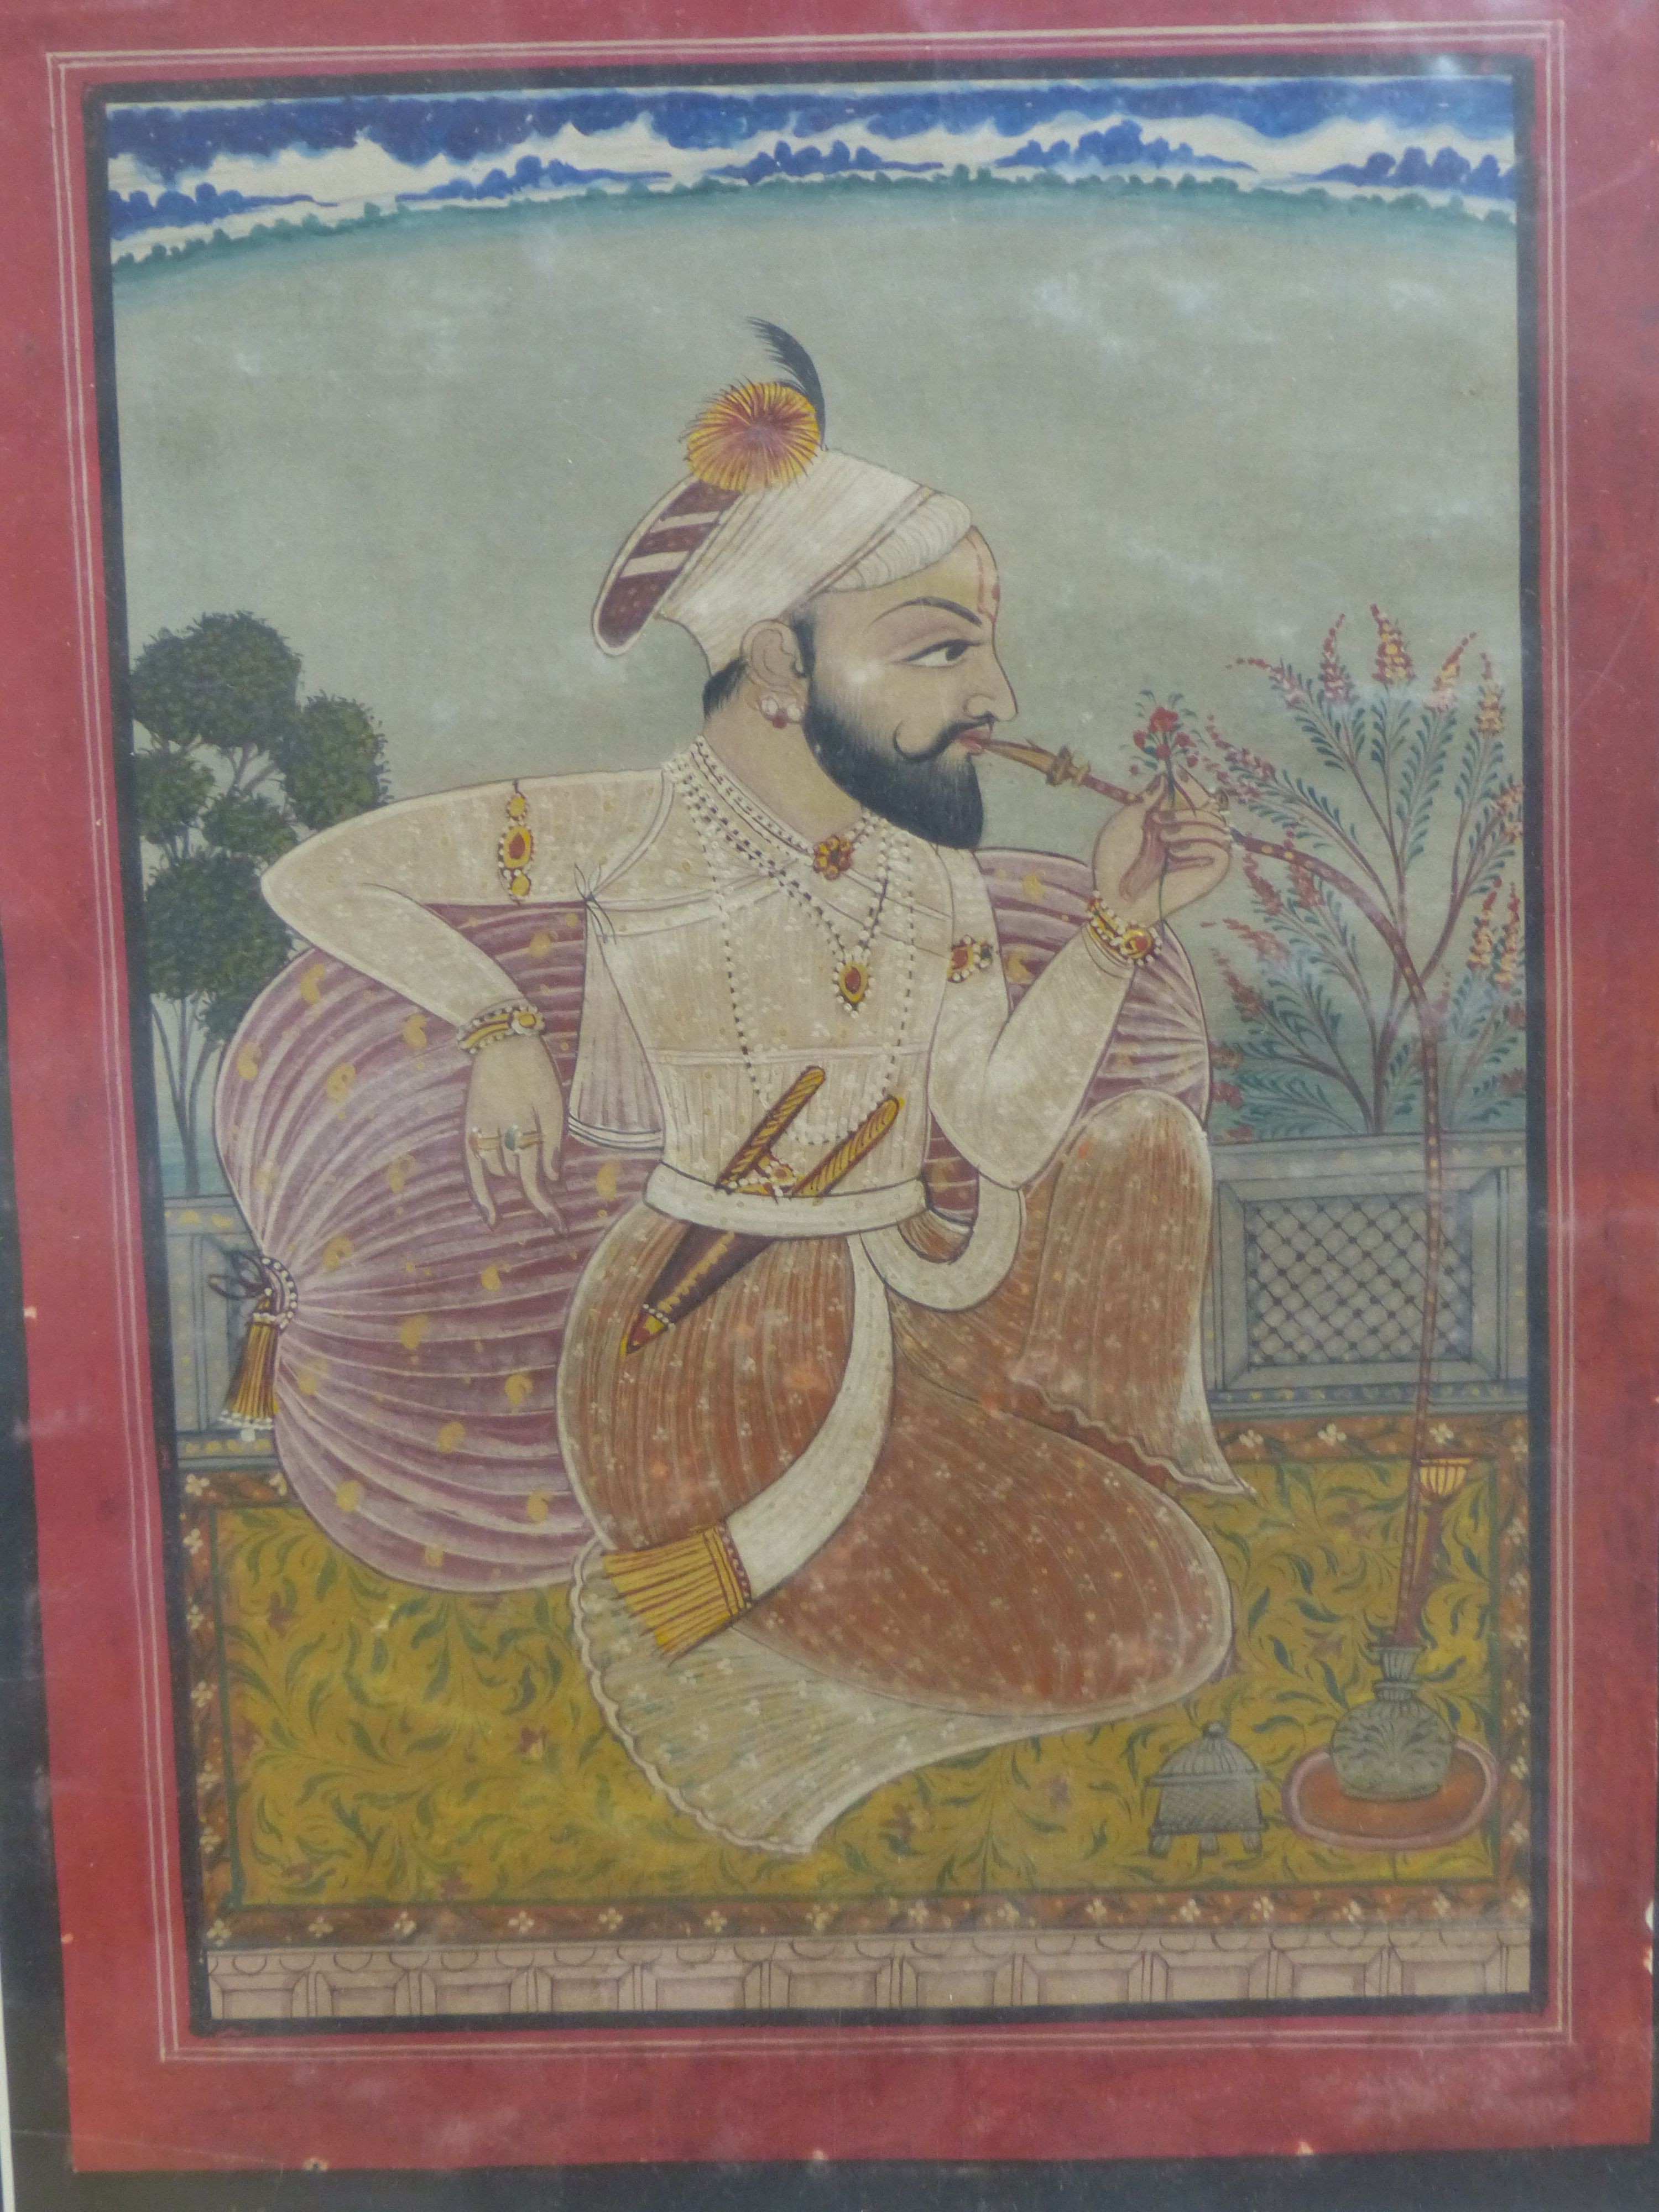 Sikh School, watercolour and gouache, Nobleman smoking a huqqa pipe, 26 x 19cm, unframed                                                                                                                                    